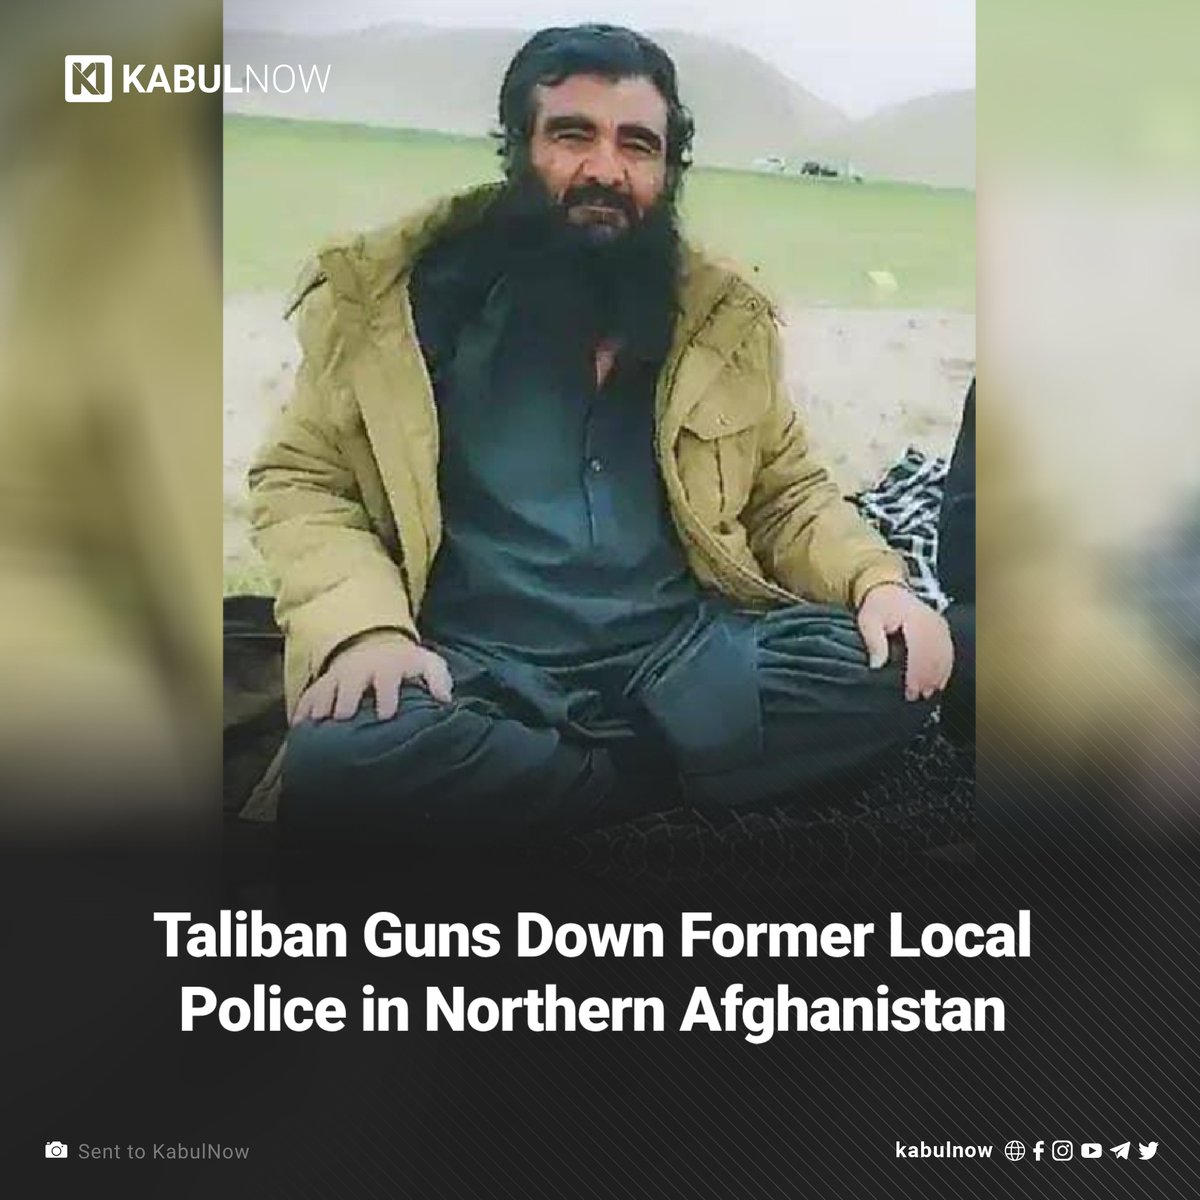 Local sources in northern Faryab province have reported that members of the Taliban gunned down a former local police officer affiliated with the previous government in the province. Read more here: kabulnow.com/?p=35634